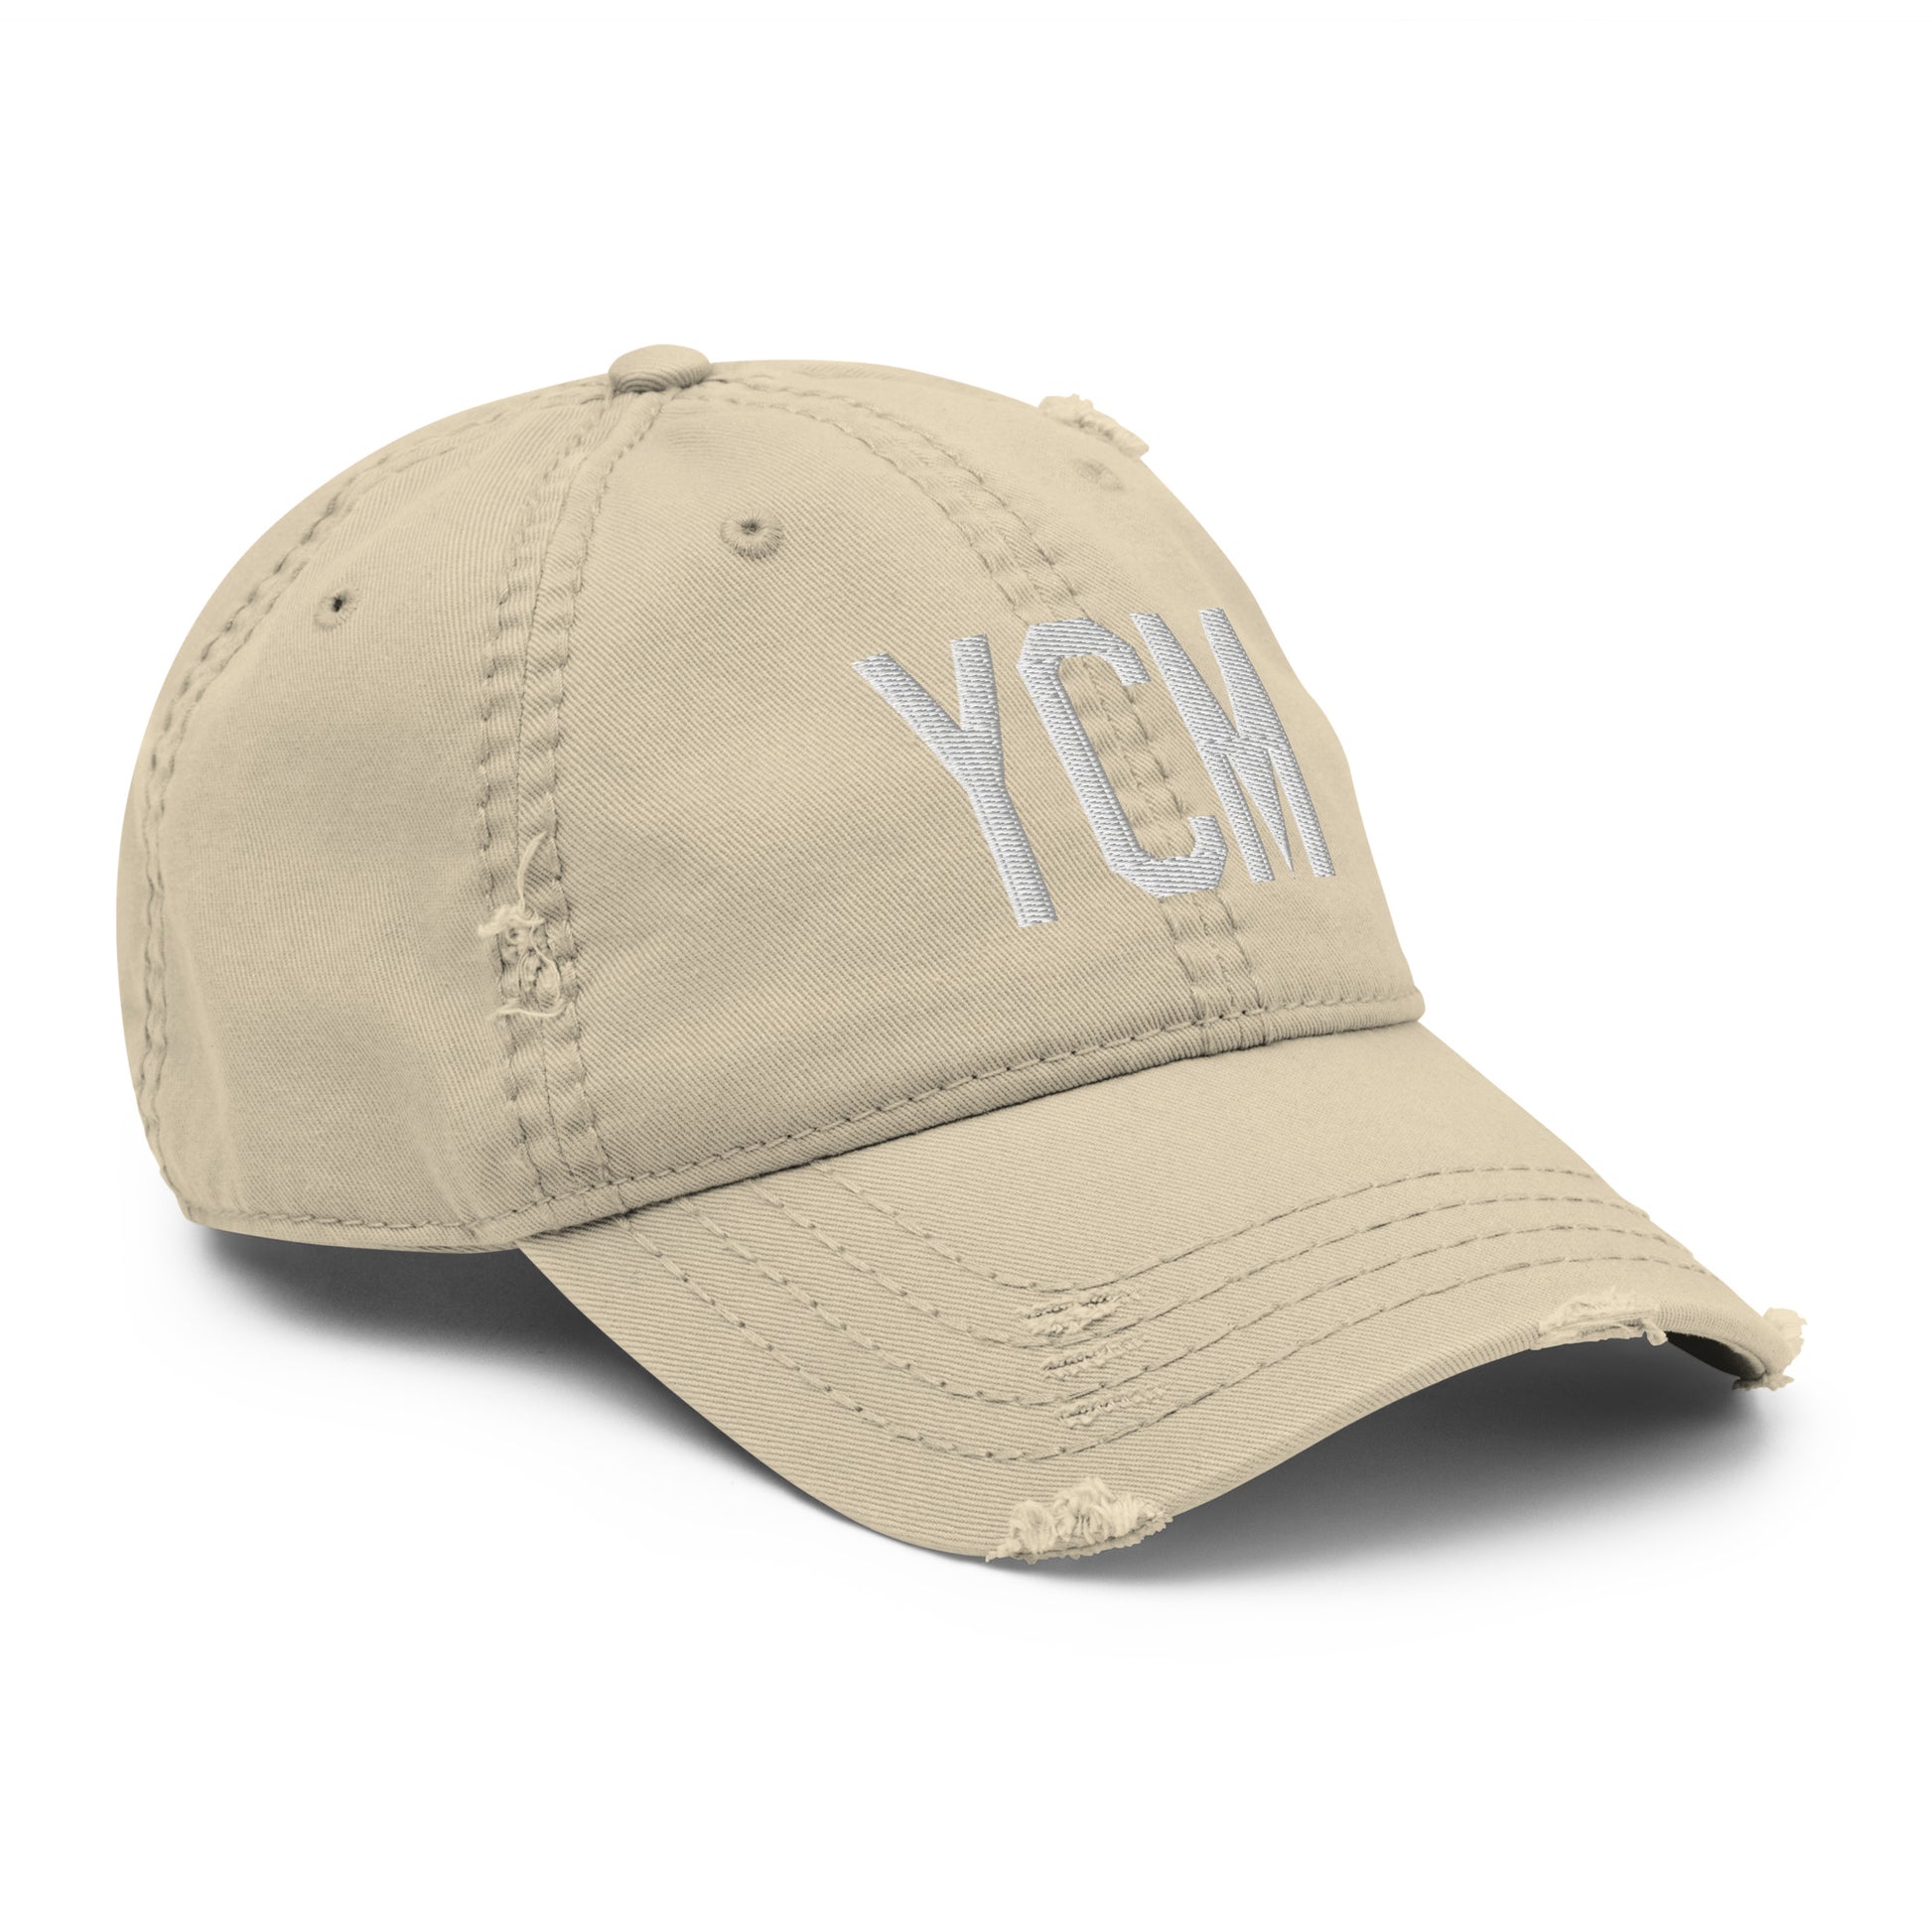 Airport Code Distressed Hat - White • YCM St. Catharines • YHM Designs - Image 20